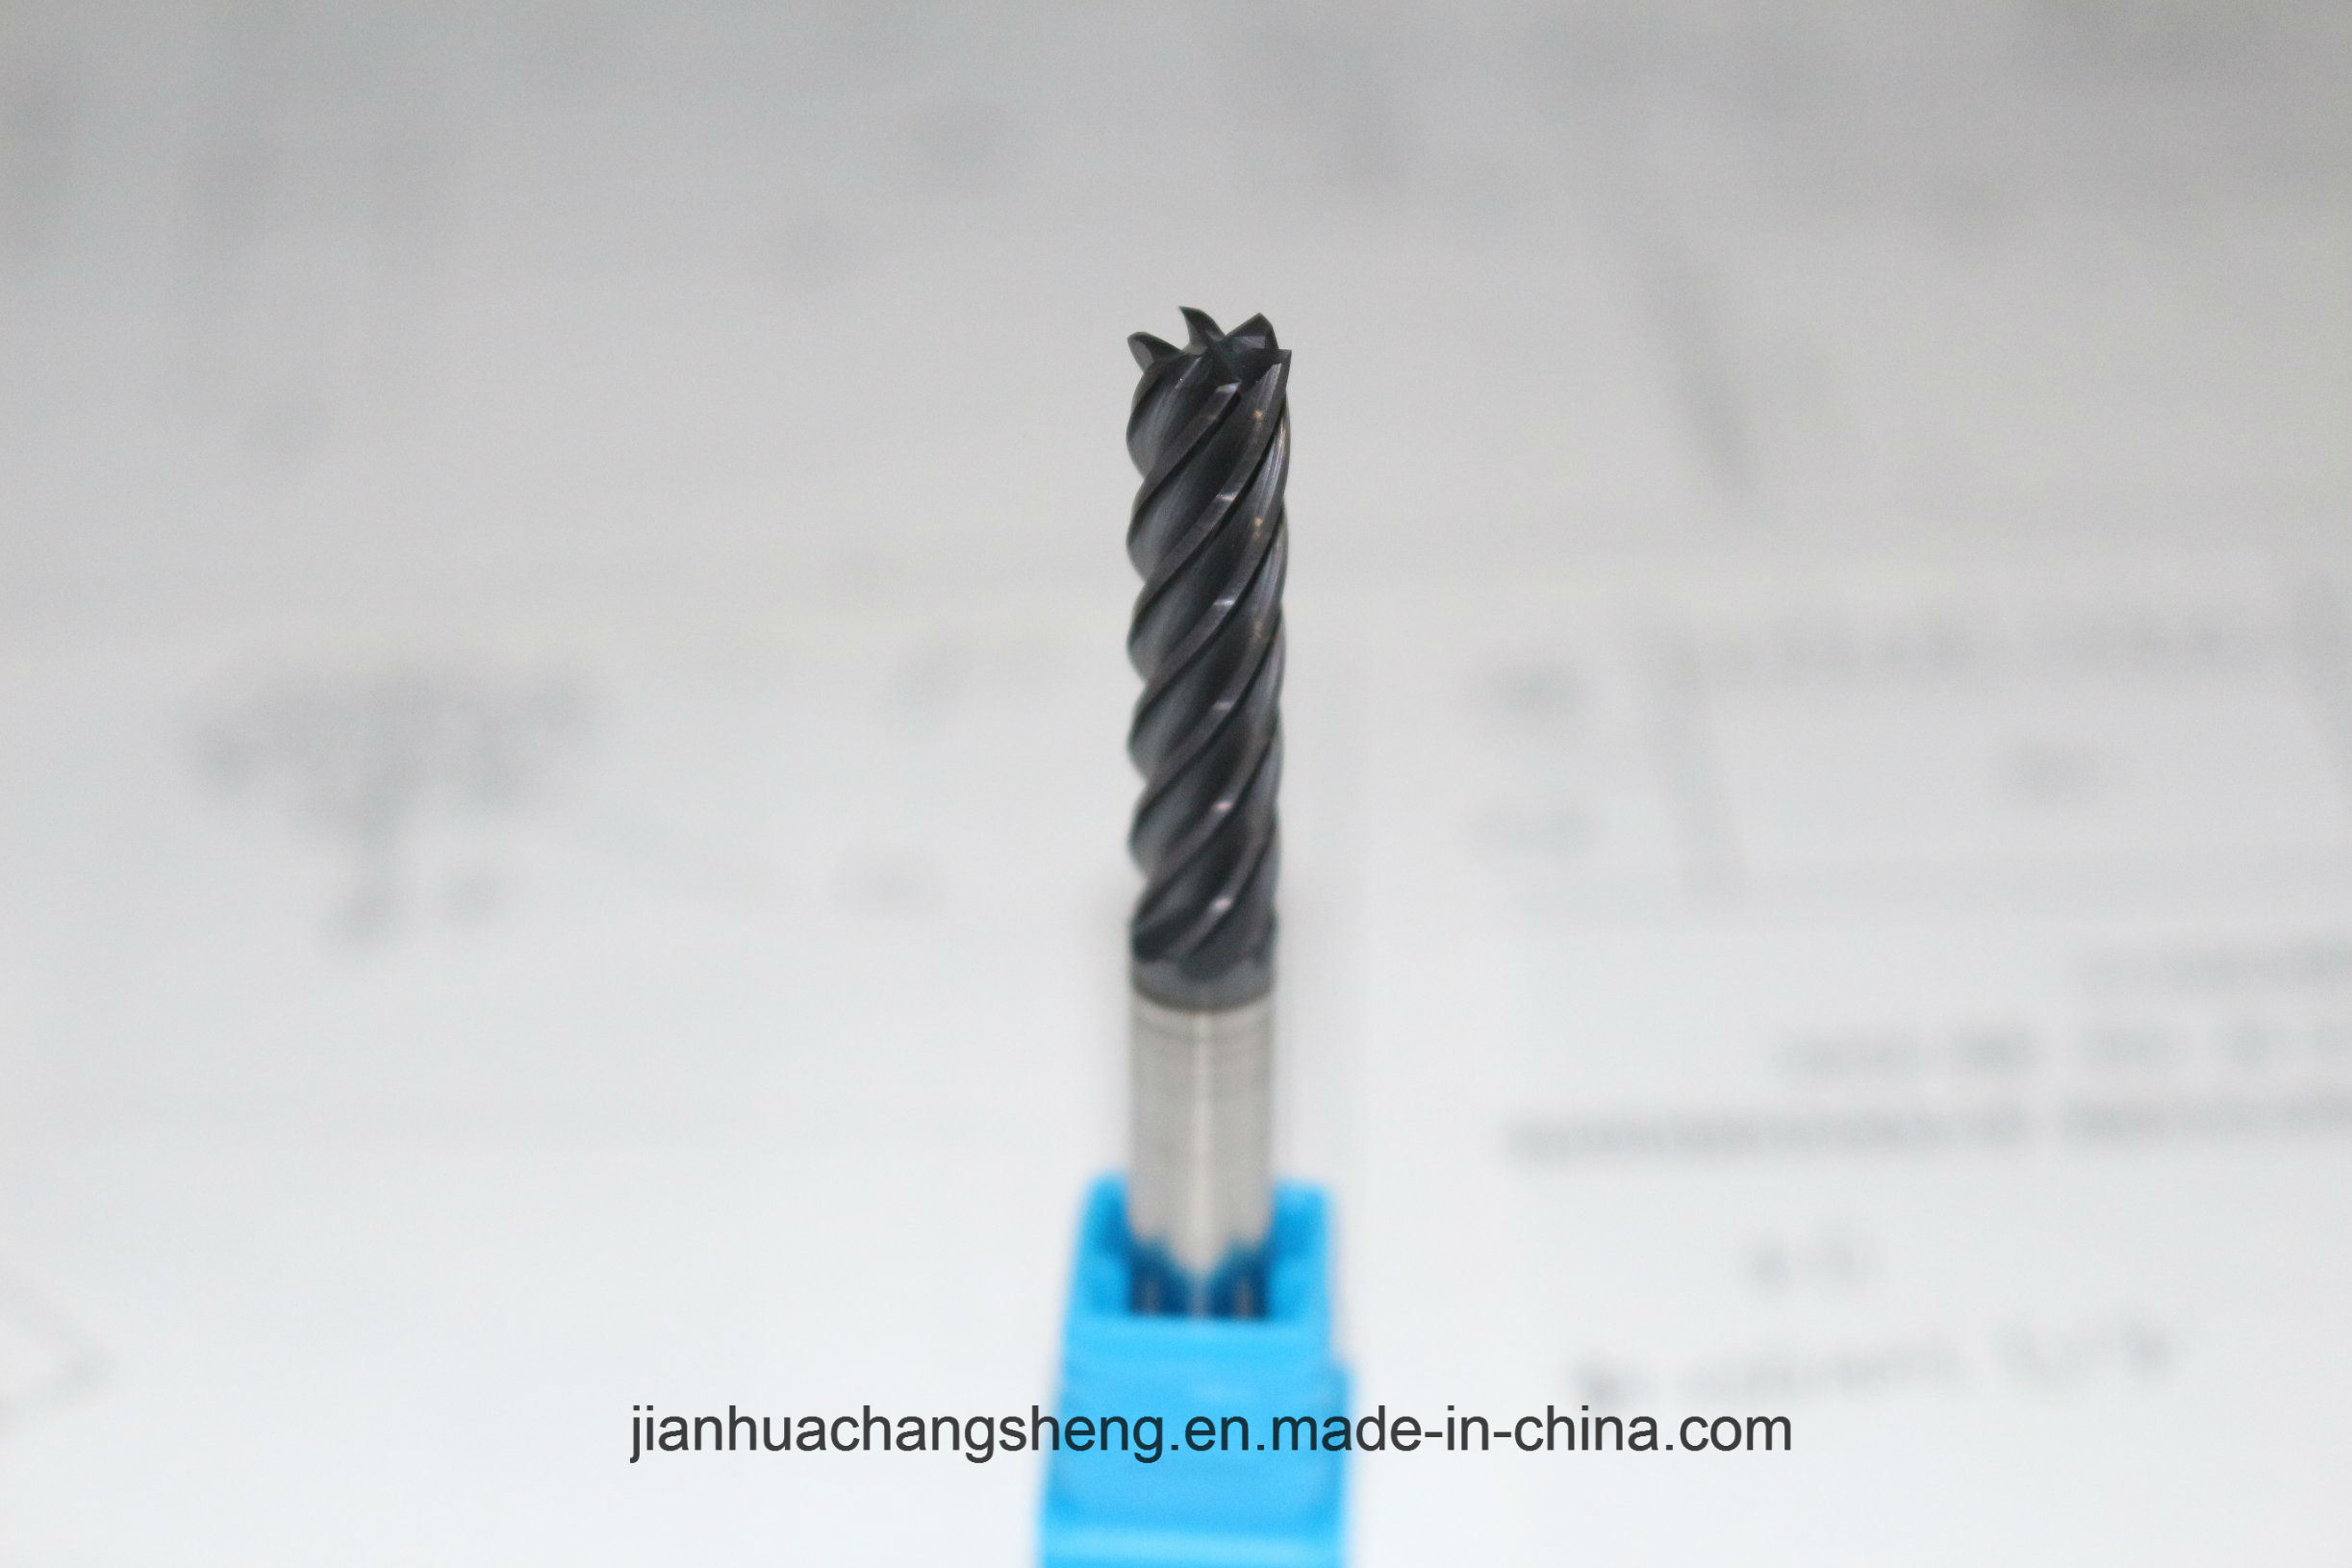 High Precision 6 Flutes Solid Carbide End Mill for Milling Special Metal /Steel/Carbon/Plastic/PVC/Diamond/Titanium/Wood/Special Material